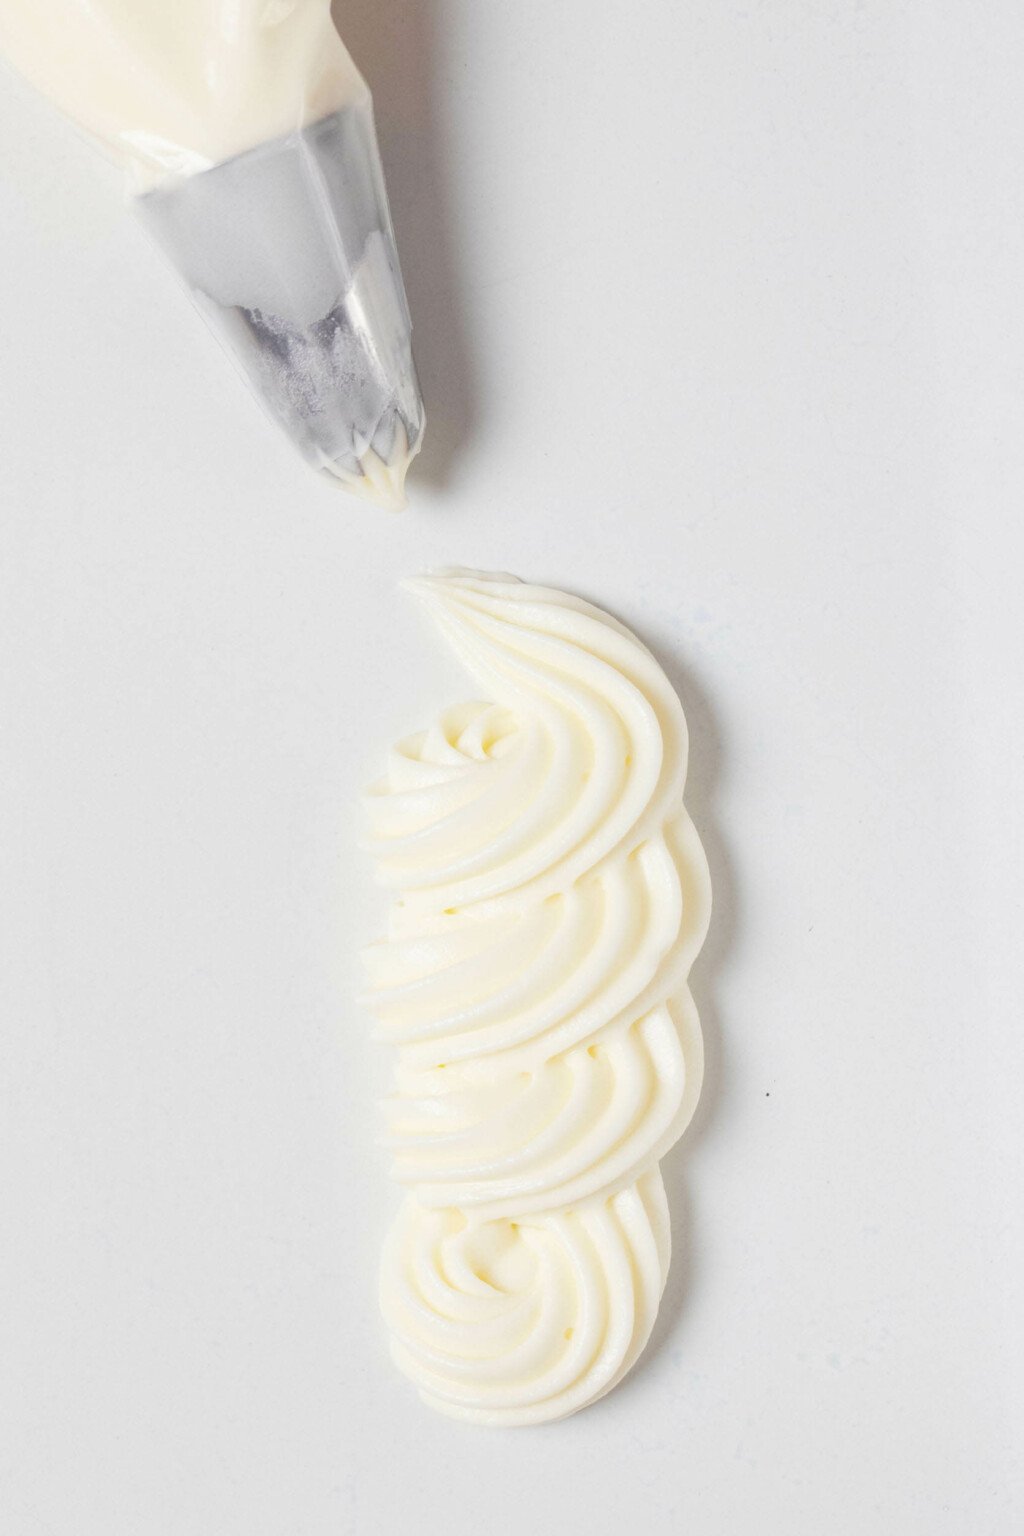 An overhead image of a squiggle of vegan cream cheese frosting, piped onto a flat white surface.